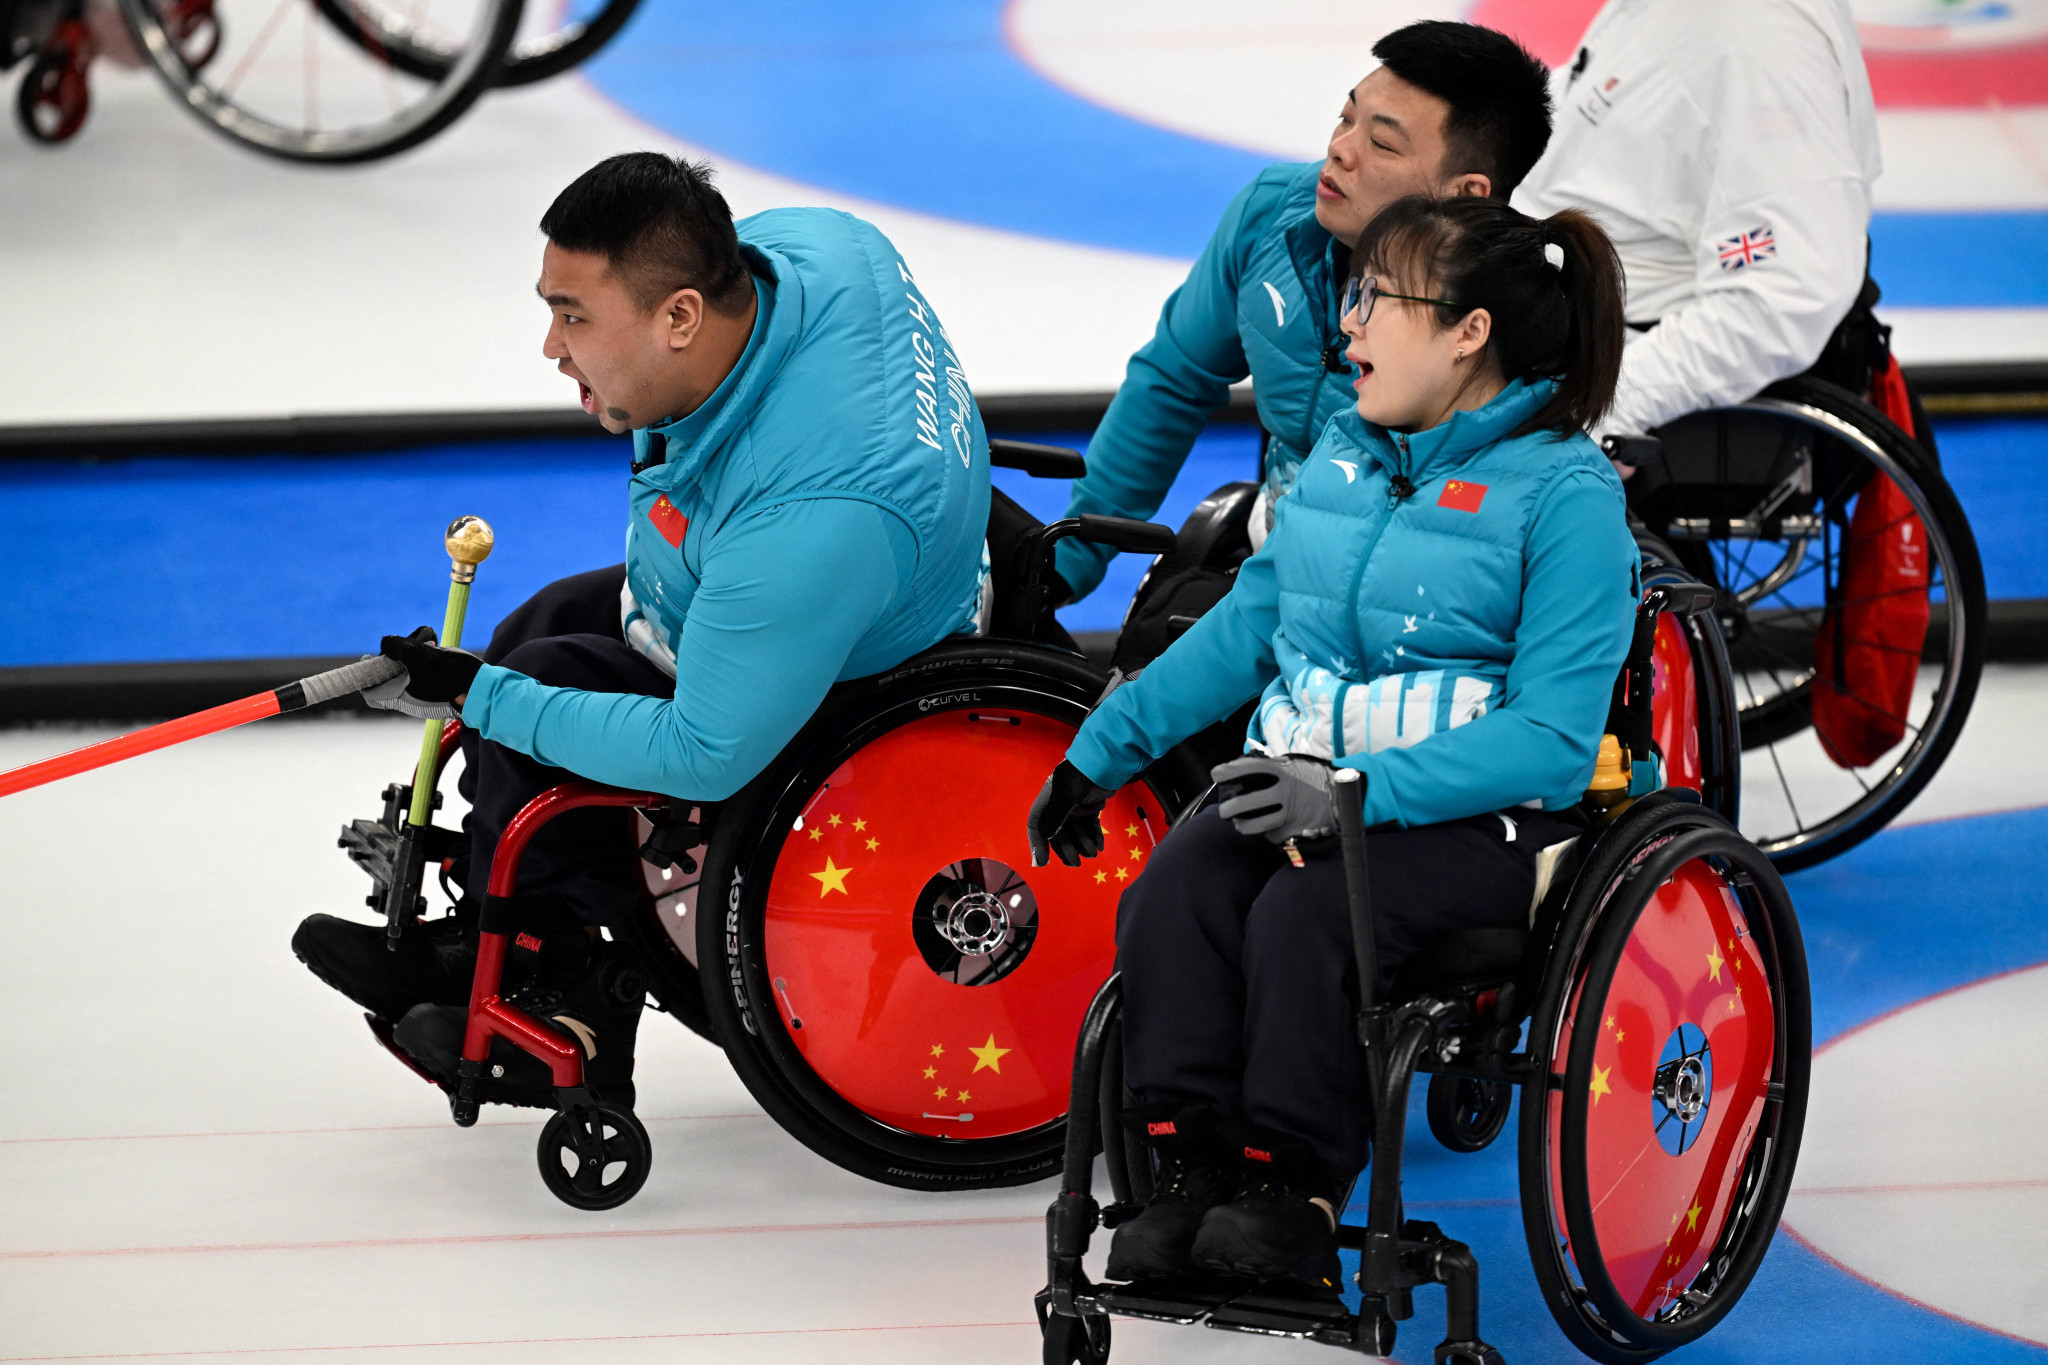 The World Wheelchair Curling Championship was one of the last major sporting events to take place before the COVID-19 shutdown ©Getty Images